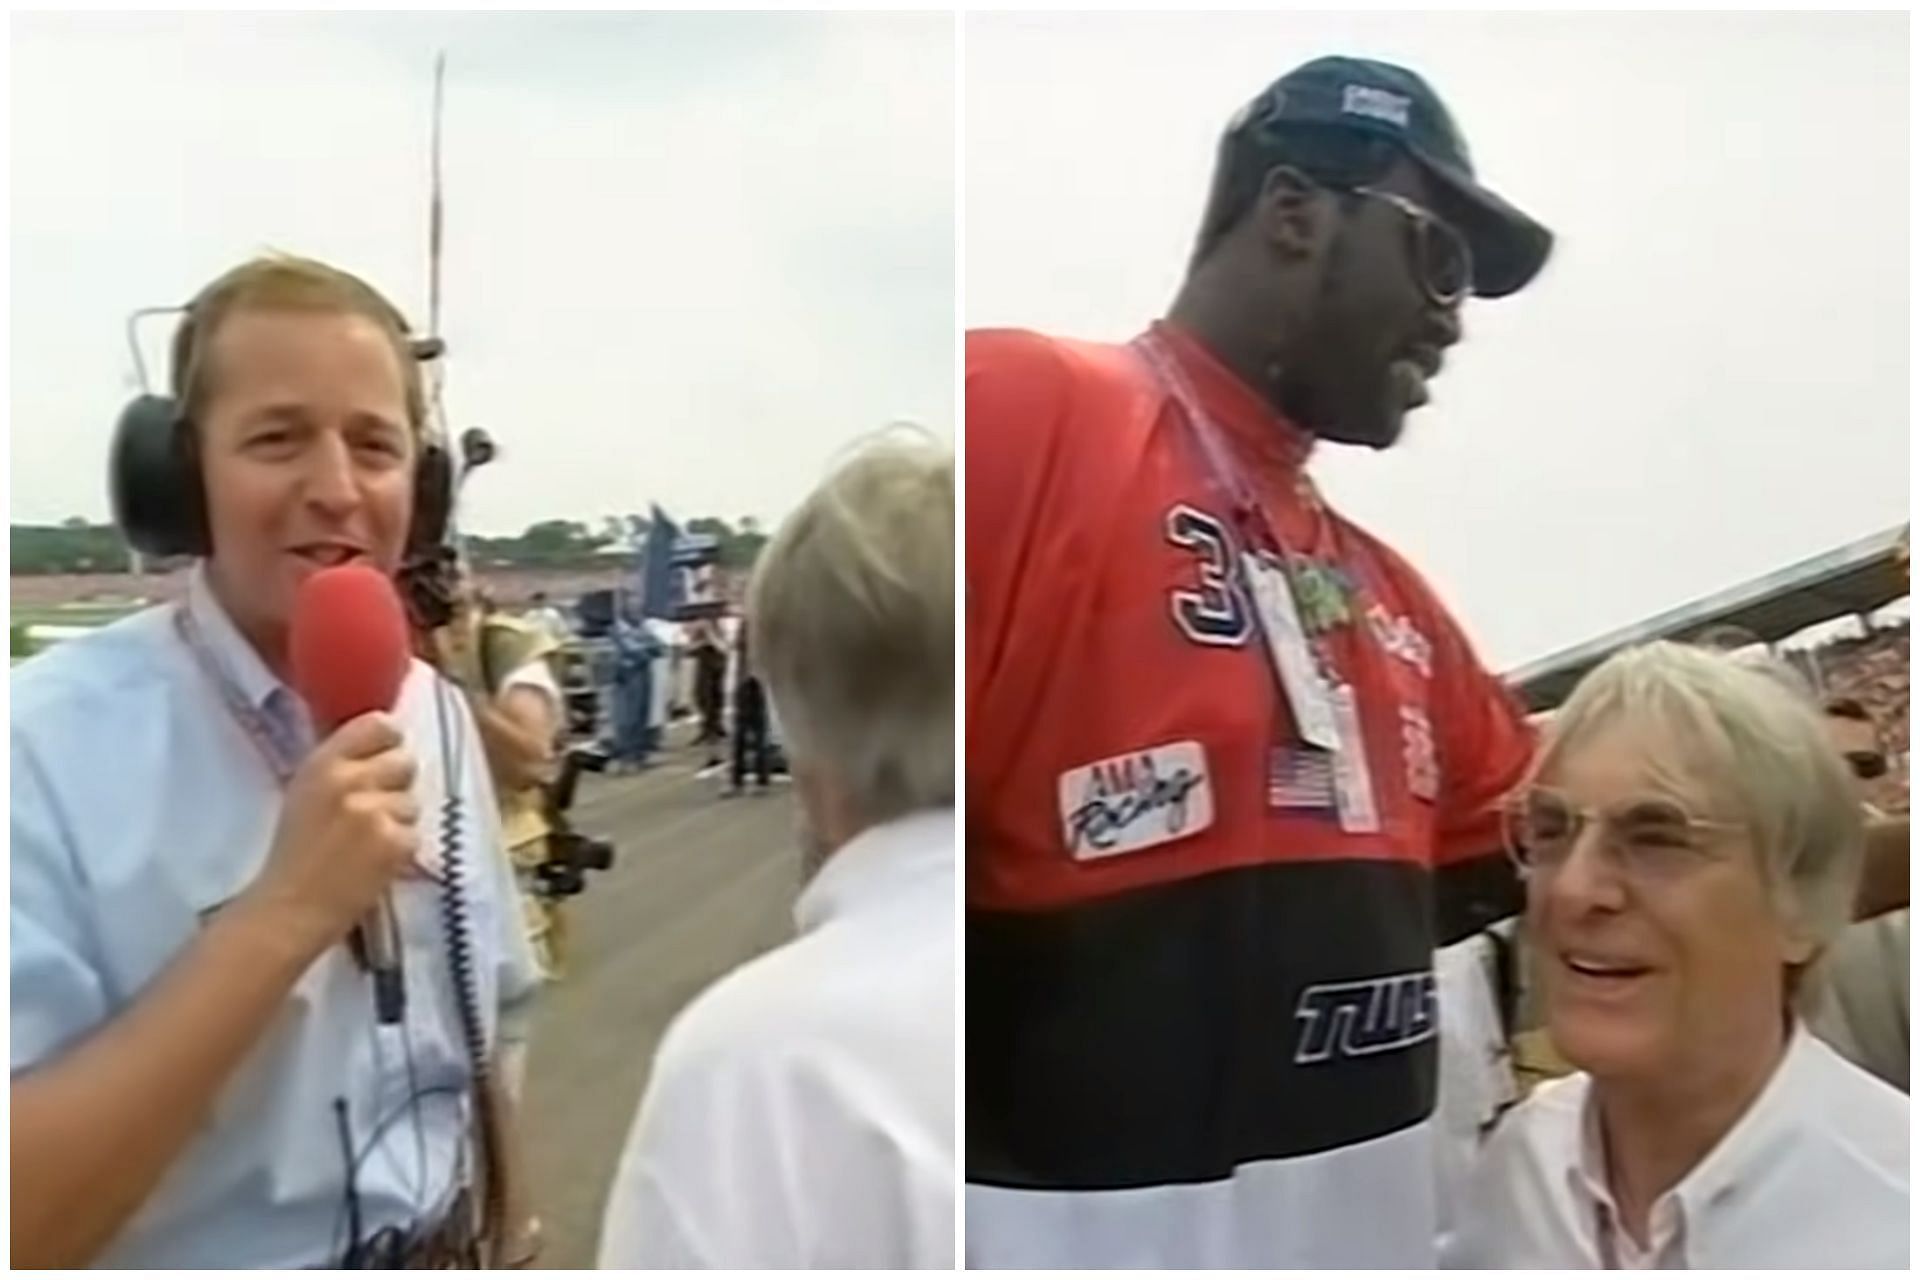 Martin Brundle meets Shaquille O Neil and former F1 CEO Bernie Ecclestone on a grid walk at the 2001 F1 German GP (Image via Sportskeeda) 